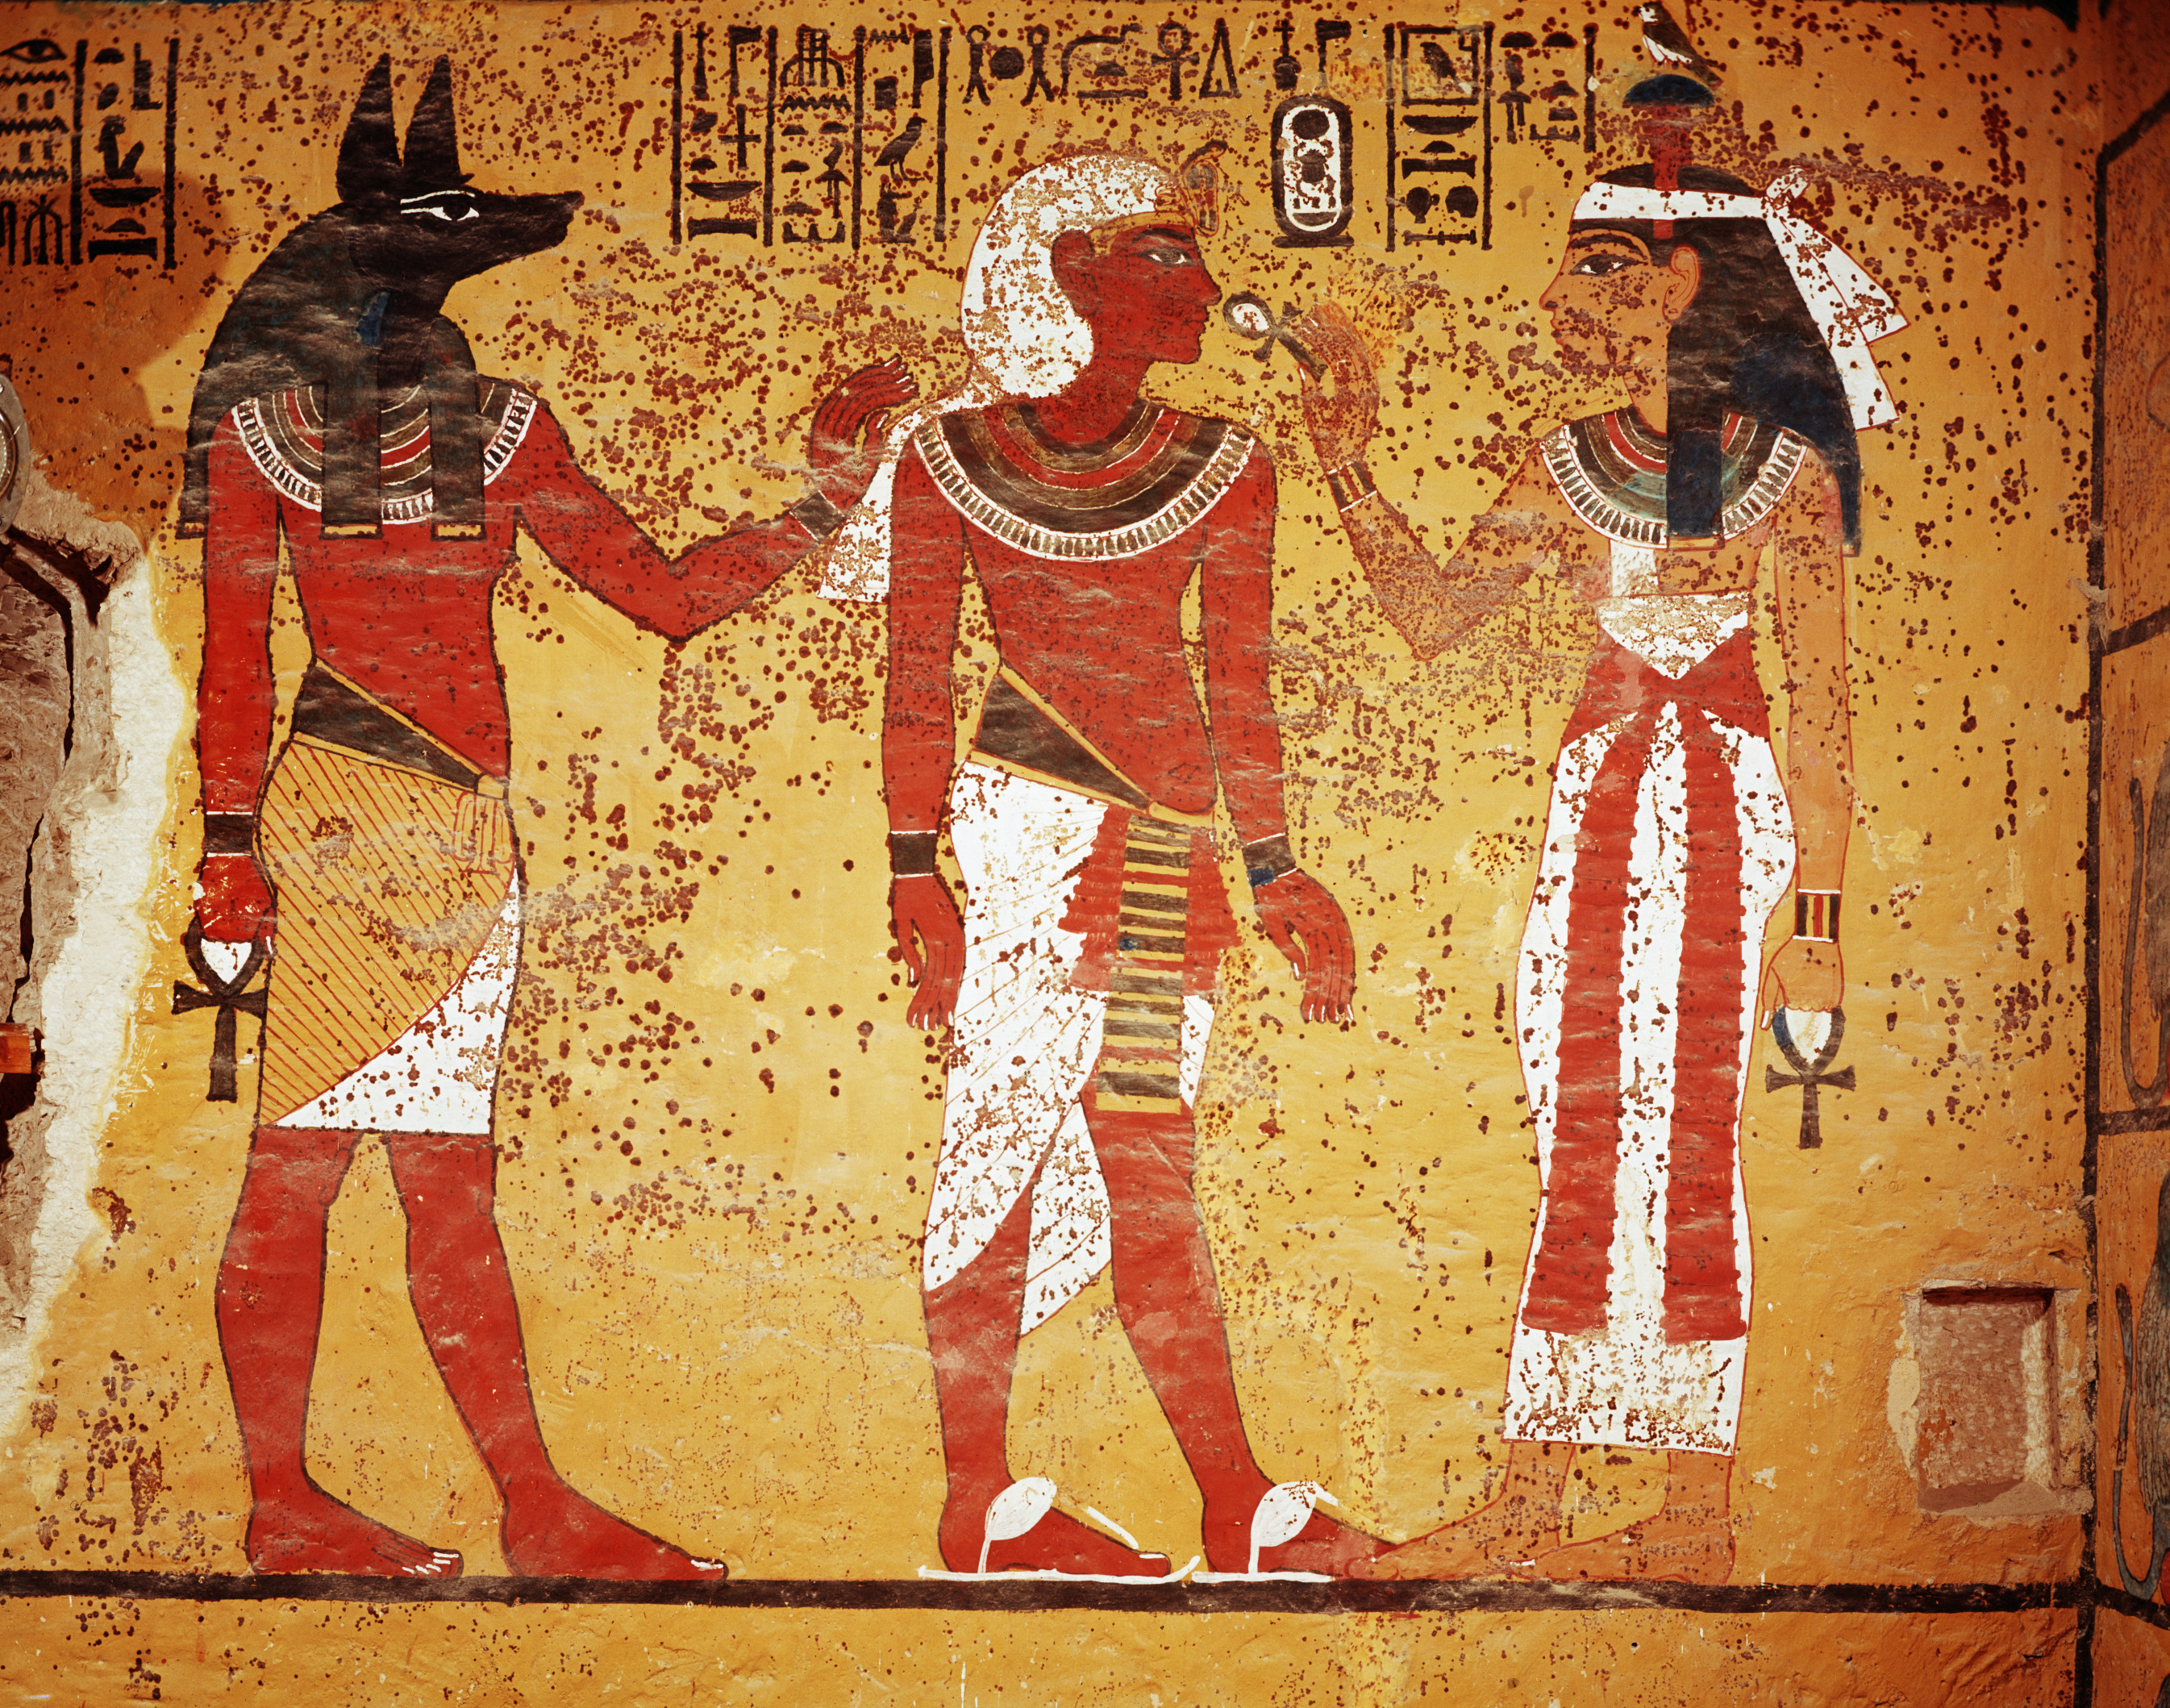 8 Awesome Facts About Ancient Egypt